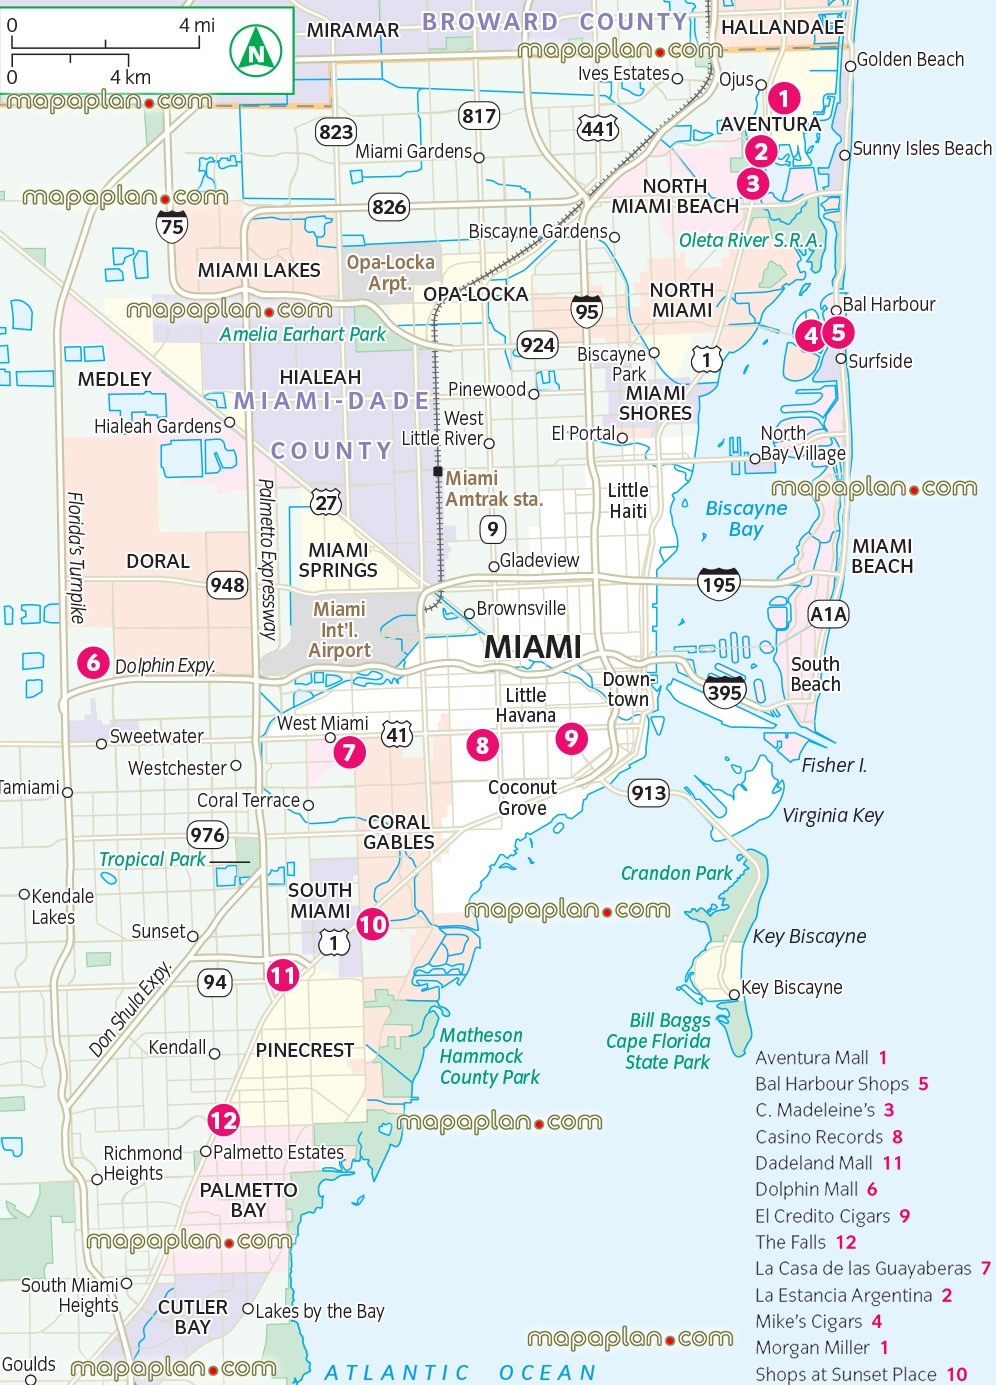 miami metro area large districts shopping malls detailed interactive shopping suburbs zoning main district areas municipal regions jpg poster